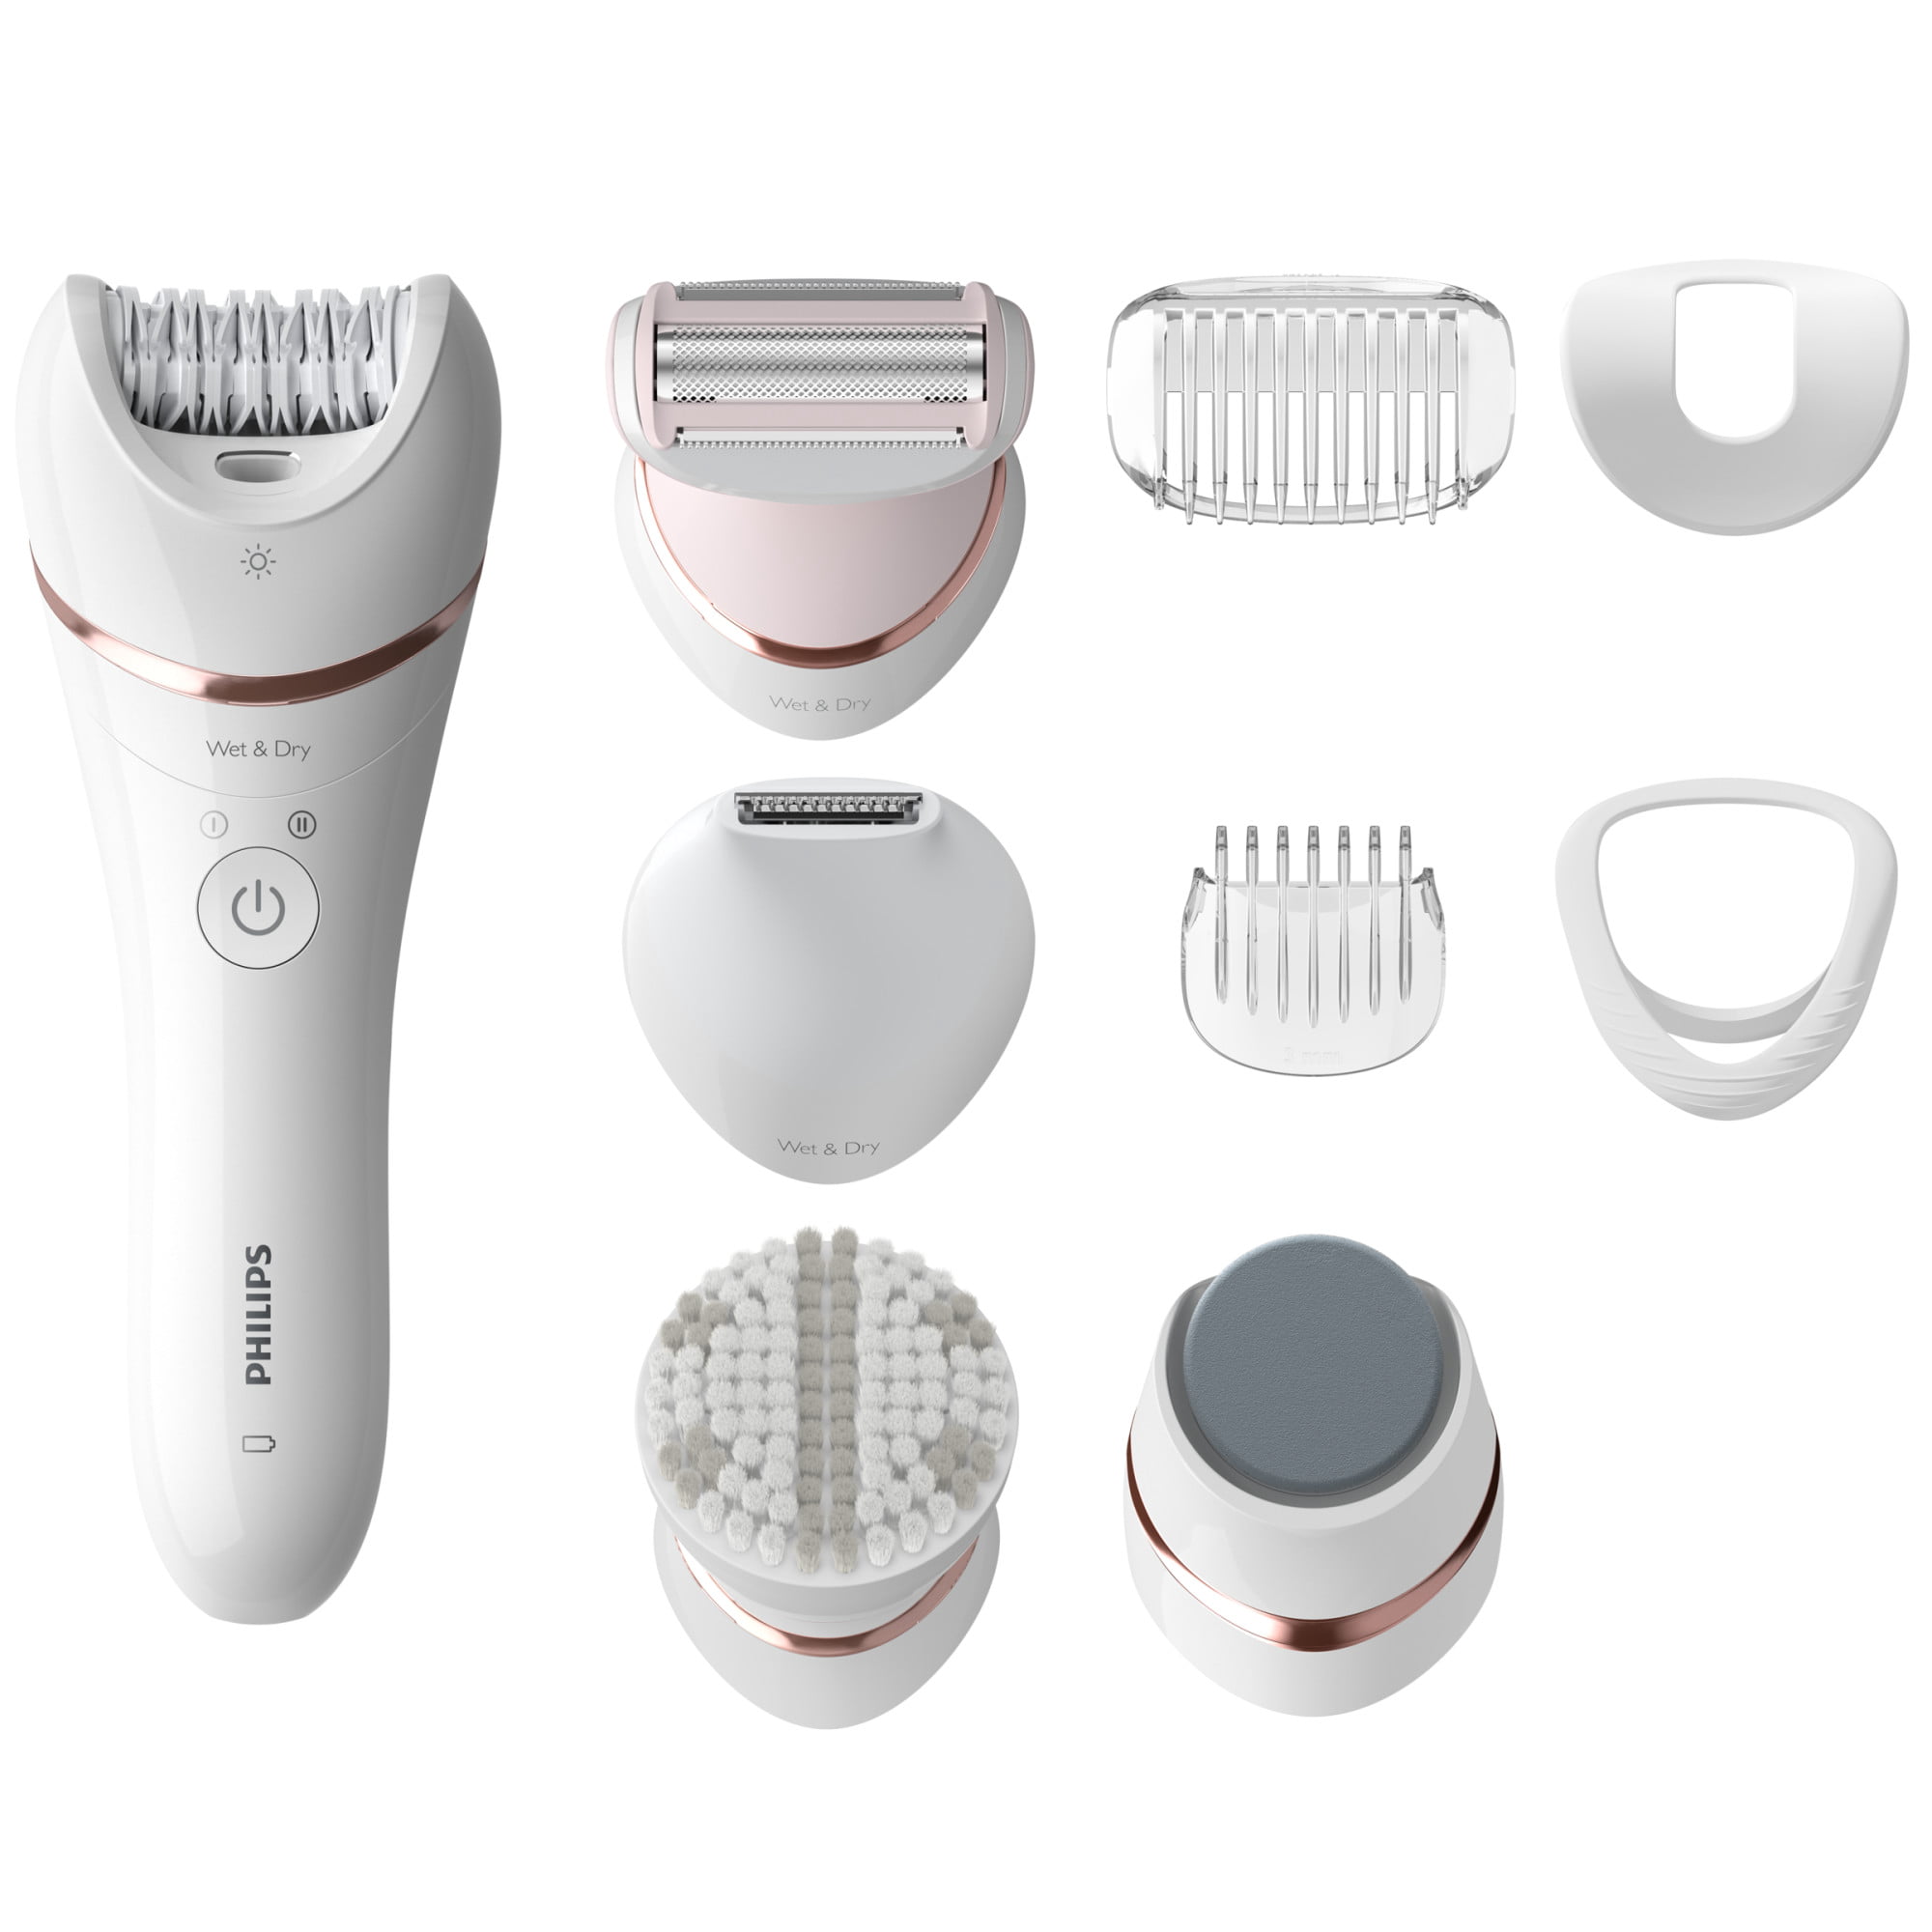 Philips Epilator Series 8000 5 1 Shaver, Trimmer, Pedicure and Body Exfoliator with 9 Accessories - Walmart.com